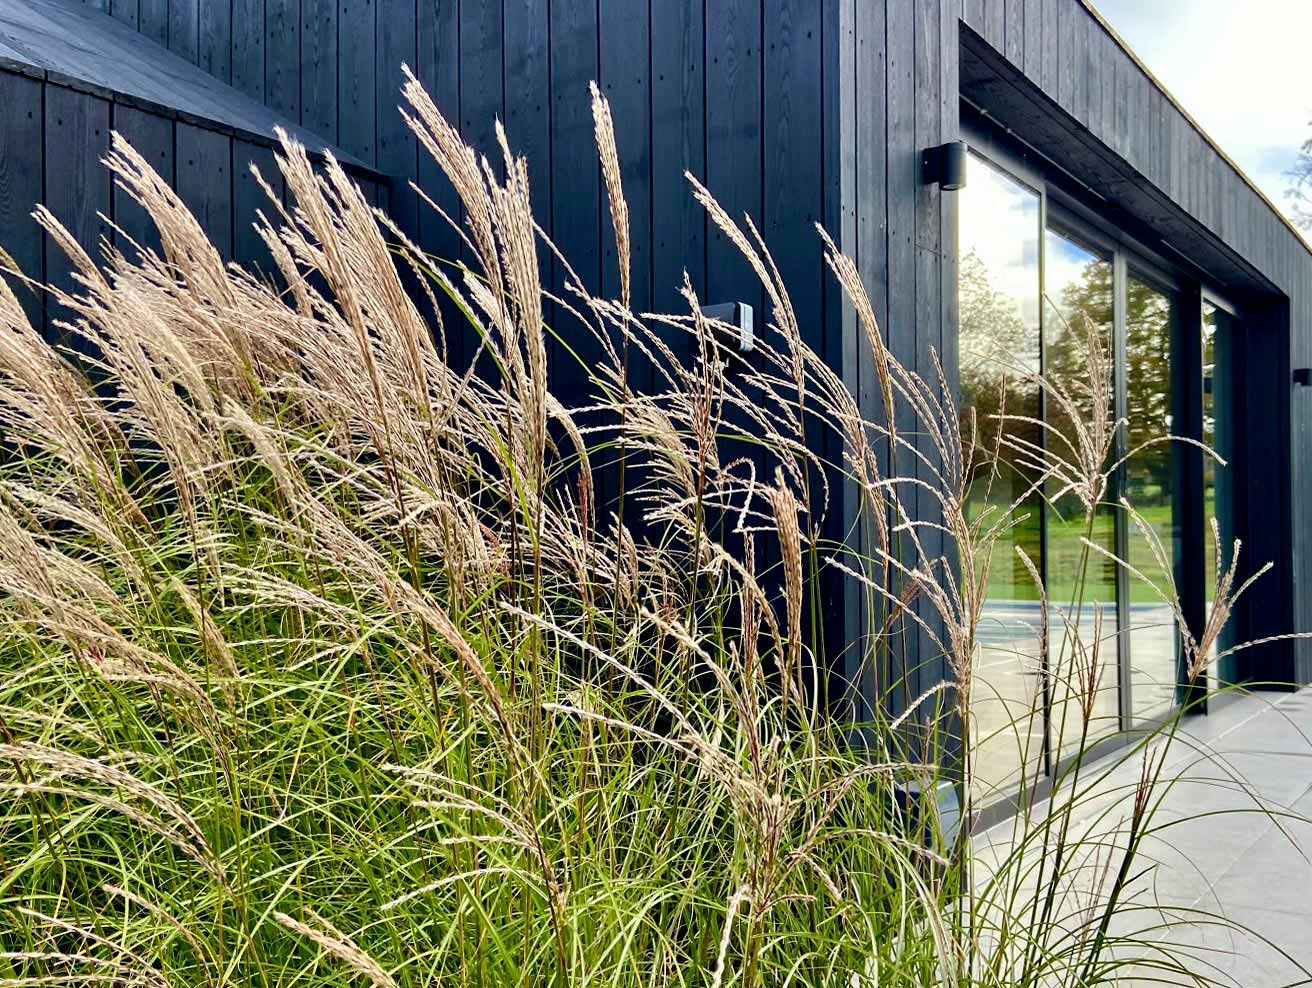 Black barn with large bifold glazed doors, decking and grasses. Rae Wilkinson Garden and Landscape Designer Surrey, Sussex, Hampshire, London, South-East England